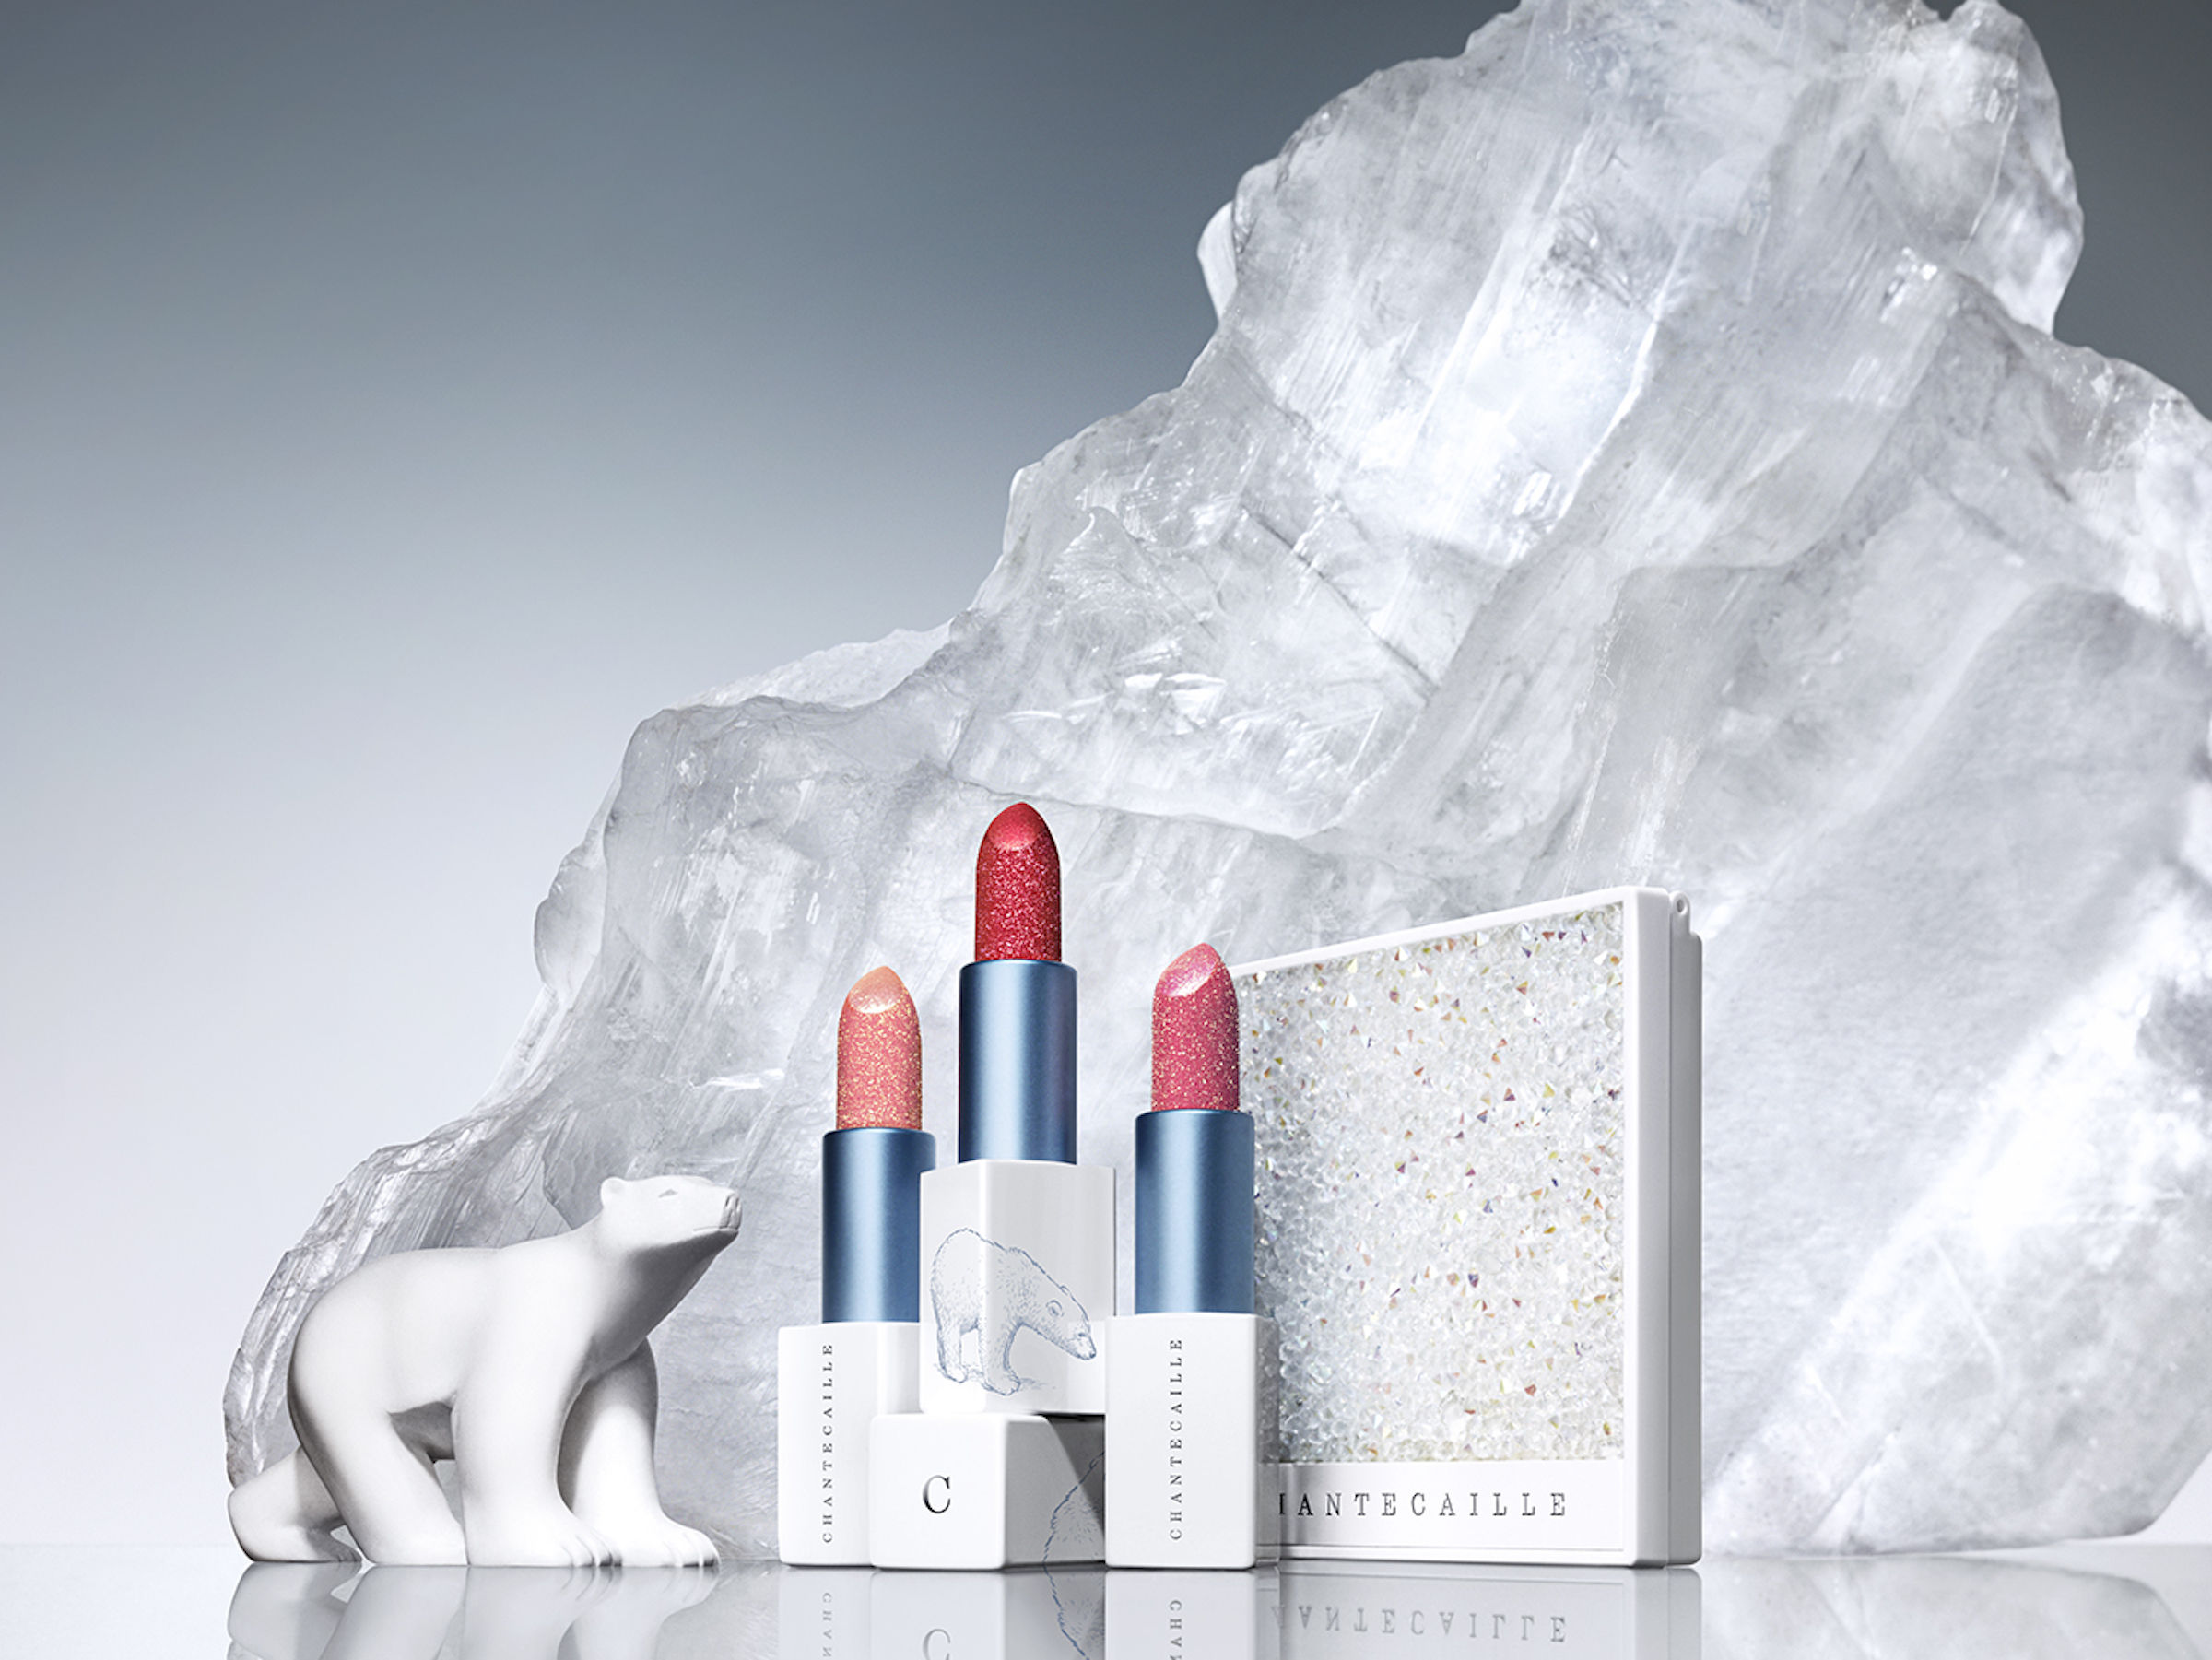 Why Chantecaille is the beauty brand that should be on your radar